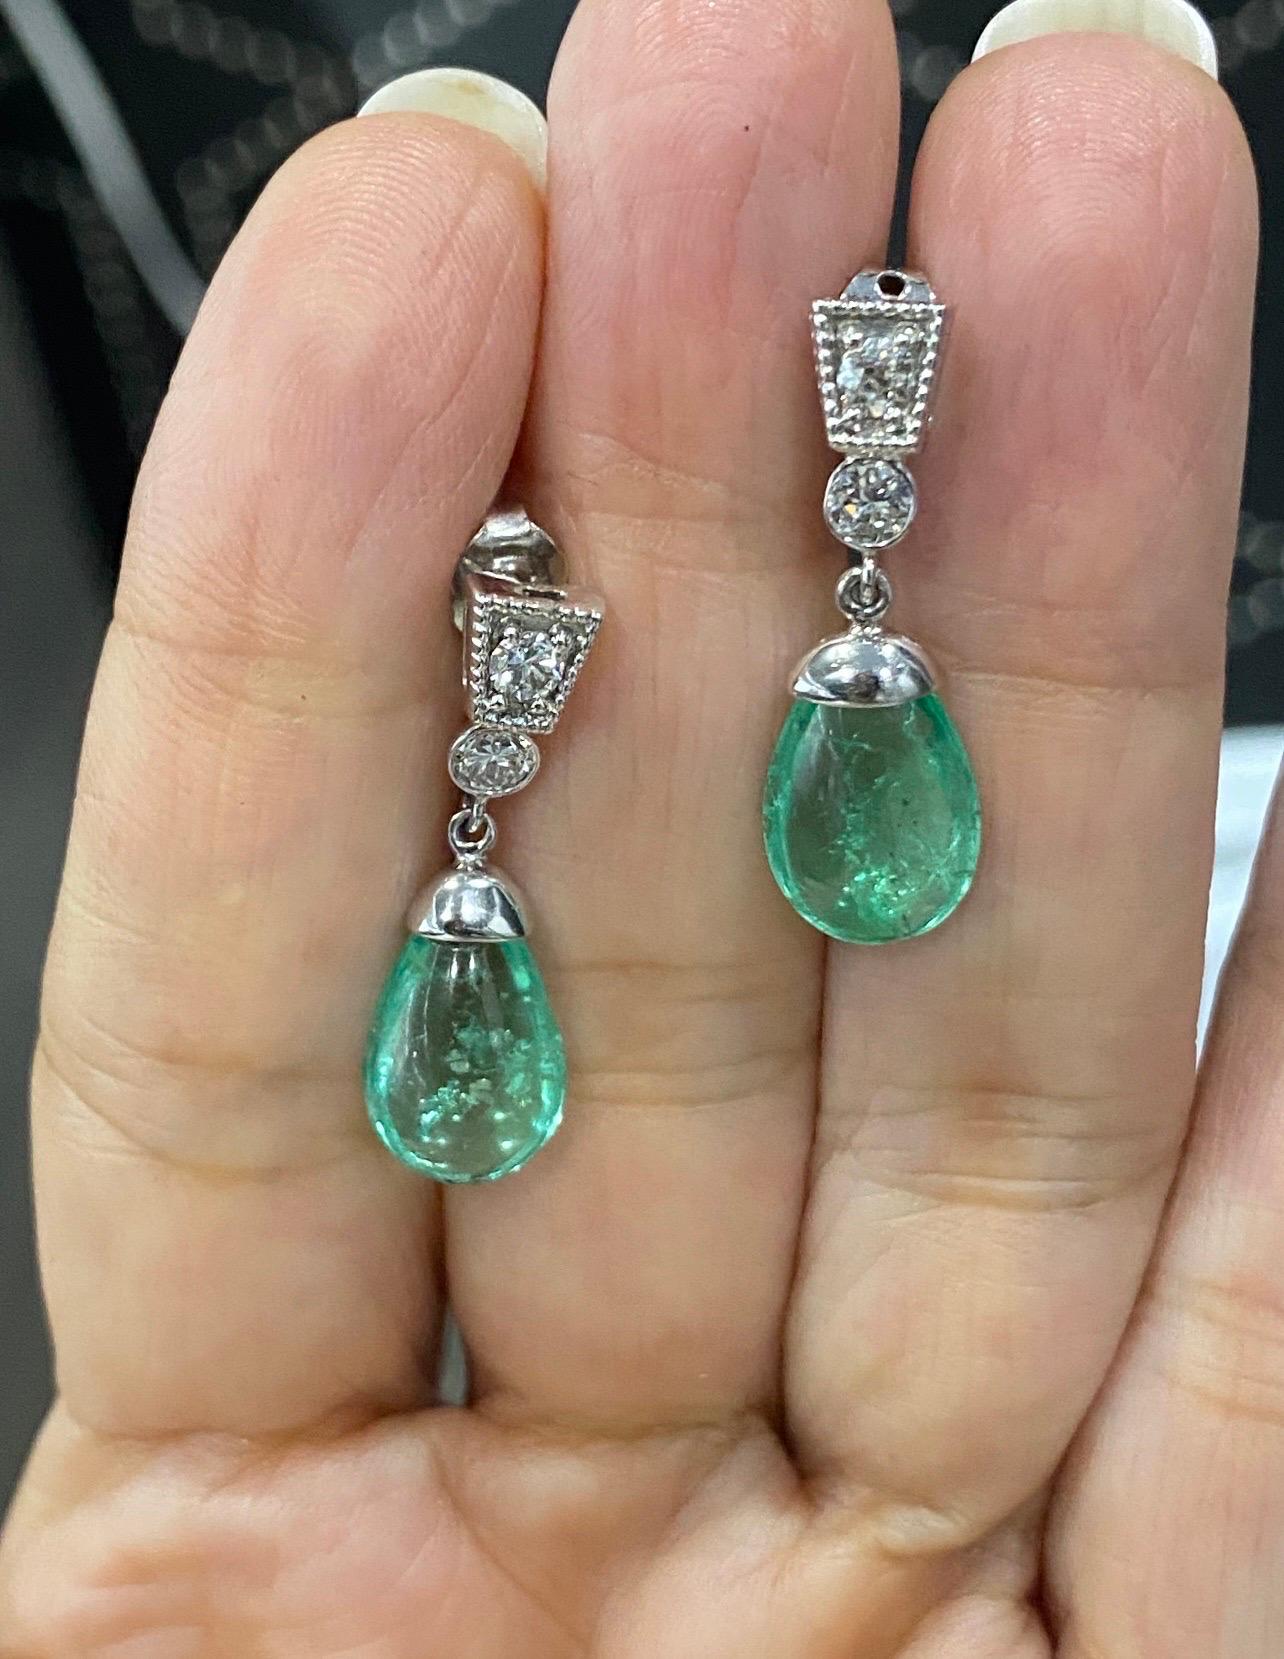 Two Cabochon Emeralds 3.50 and 3.17 CTW dangling from a art deco
bezel set Diamond and post back milgrain detailed stud. Approximately
0.35 CTW. Set in Platinum / White Gold.